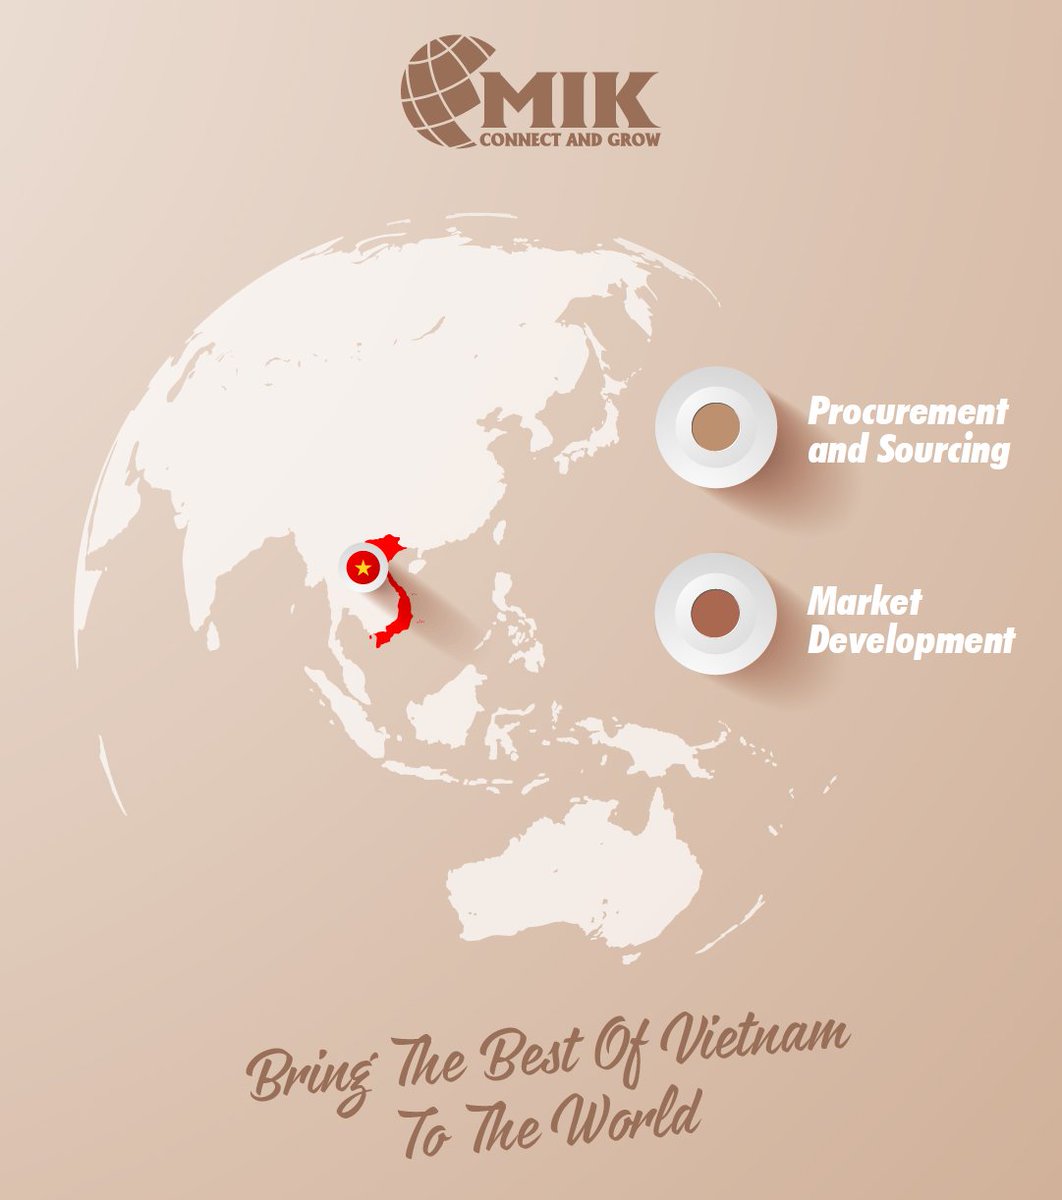 MIK Corporation, established in 2015, is a leading provider of procurement& sourcing, and market development services in Vietnam. Trust us to create a sustainable partnership and drive success for your business. #MIKCorporation #Procurement #Sourcing #MarketDevelopment #Vietnam.